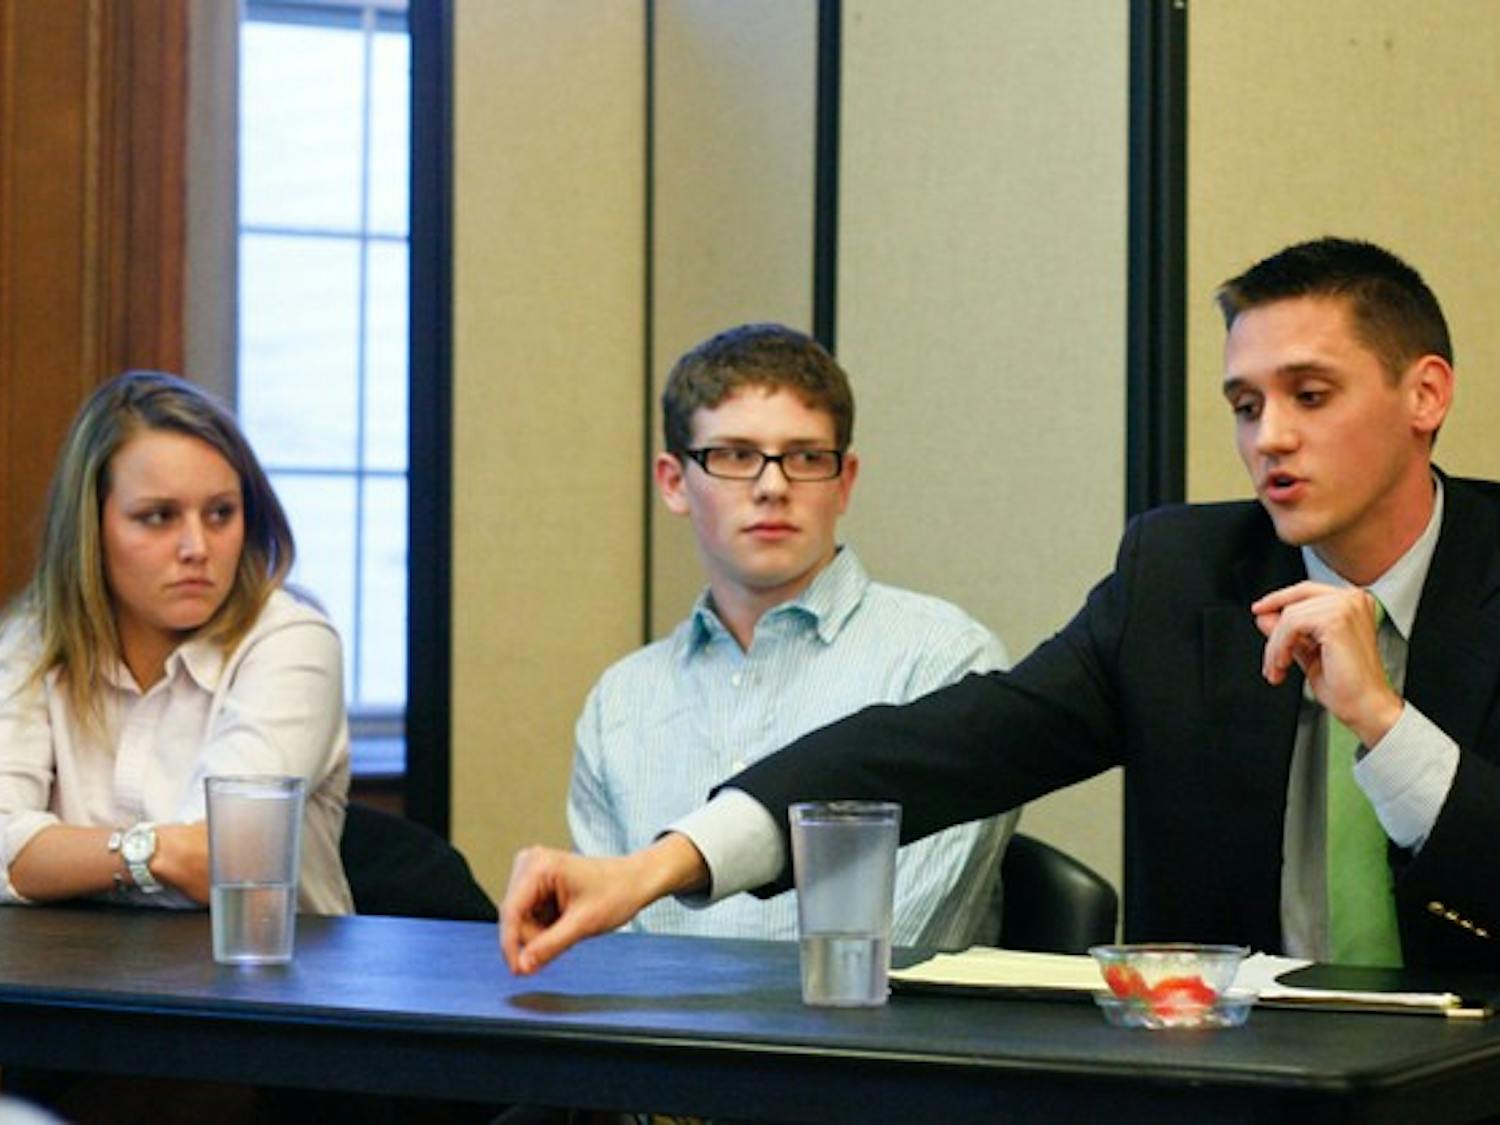 The candidates for student body president participated in a debate sponsored by The Dartmouth in Tindle Lounge on Monday.